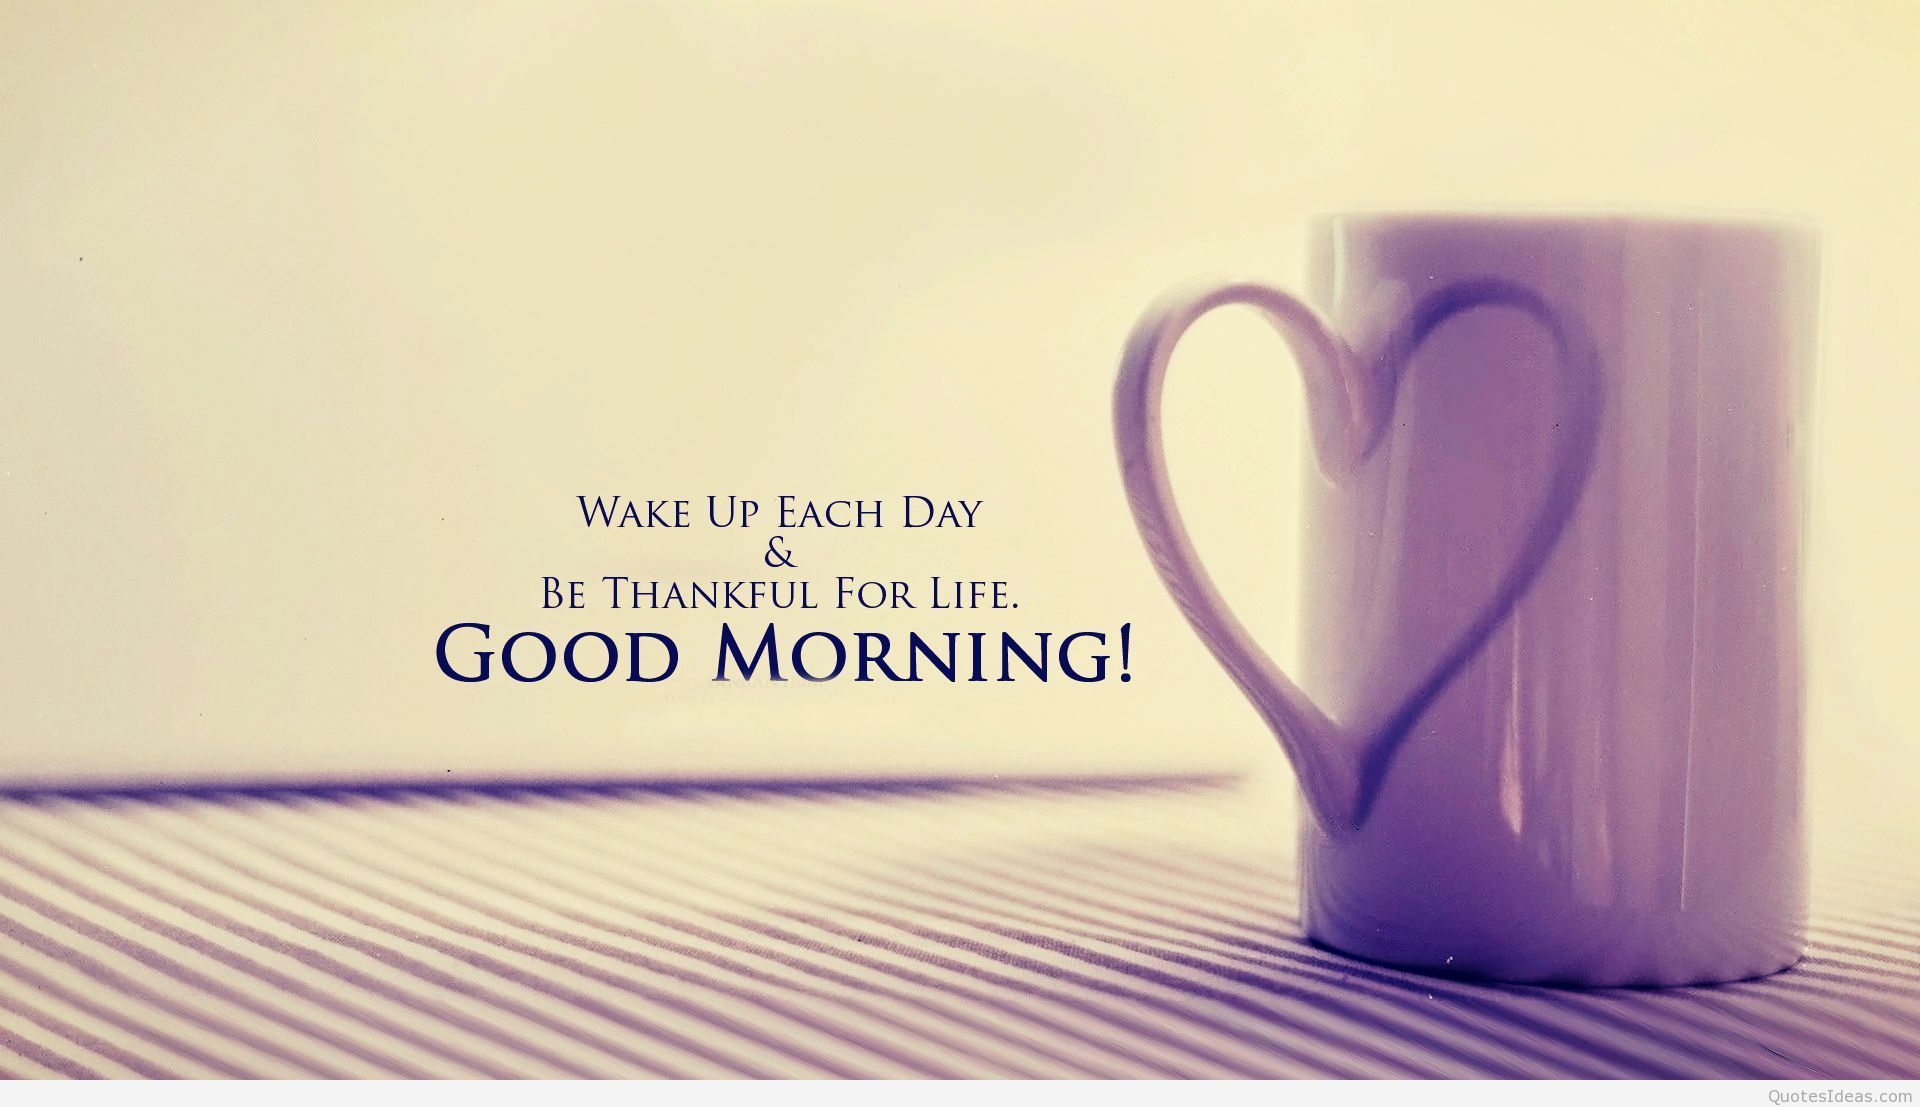 Good morning background quotes hd